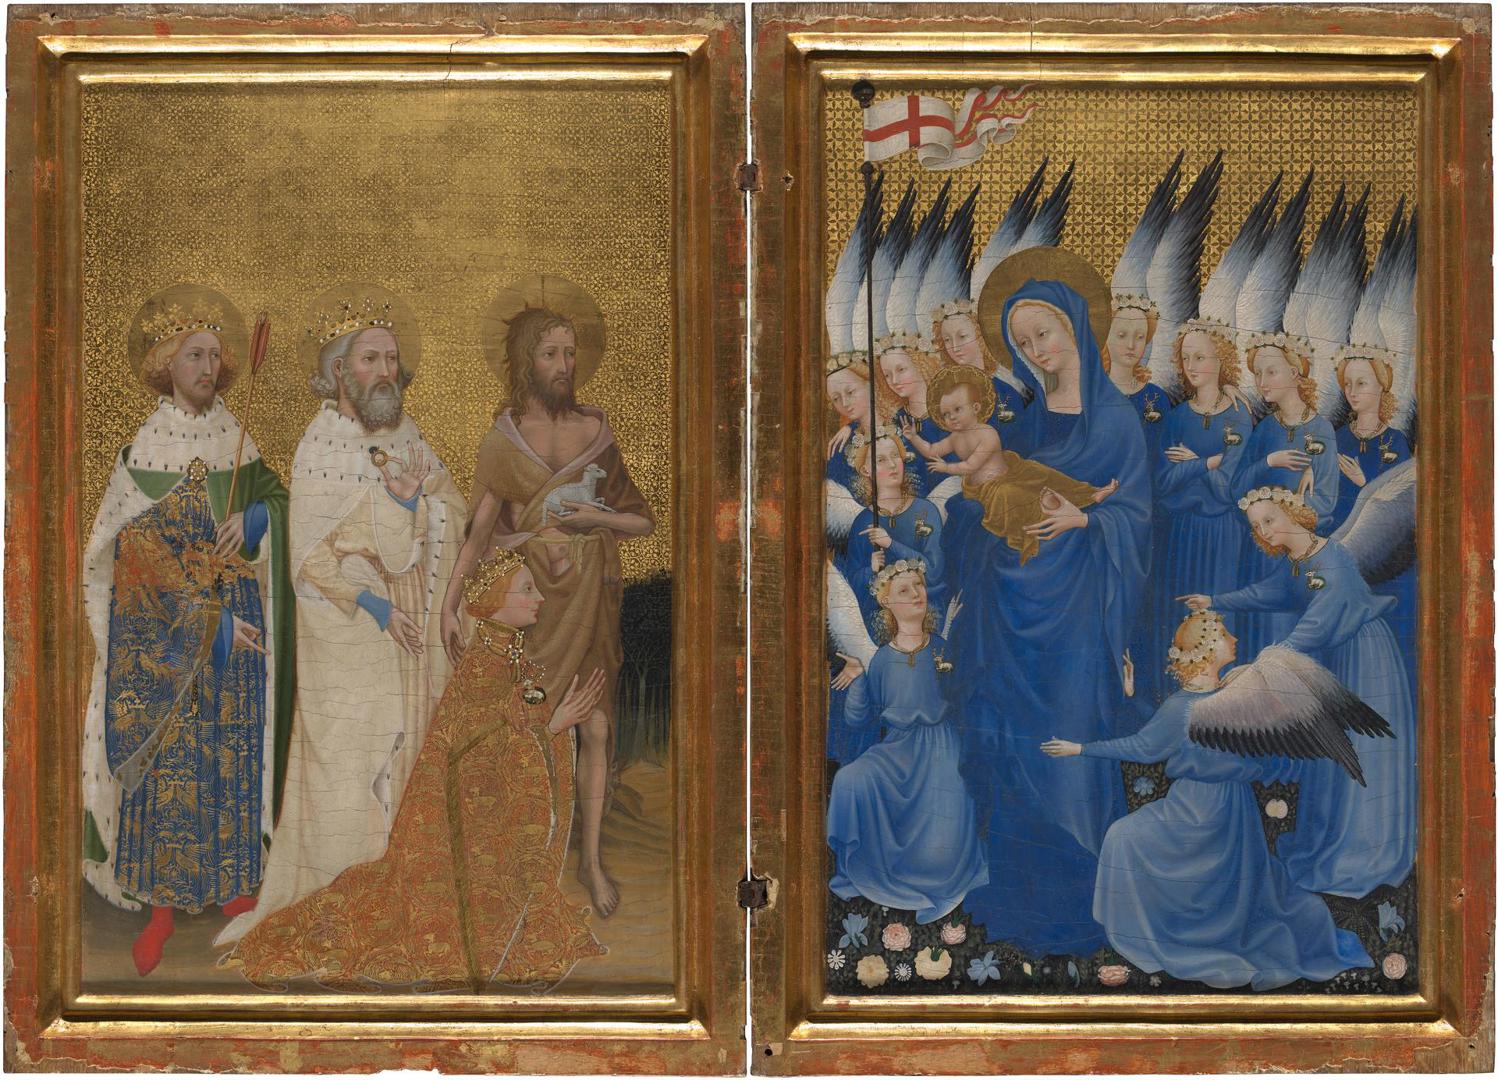 The Wilton Diptych by English or French (?)